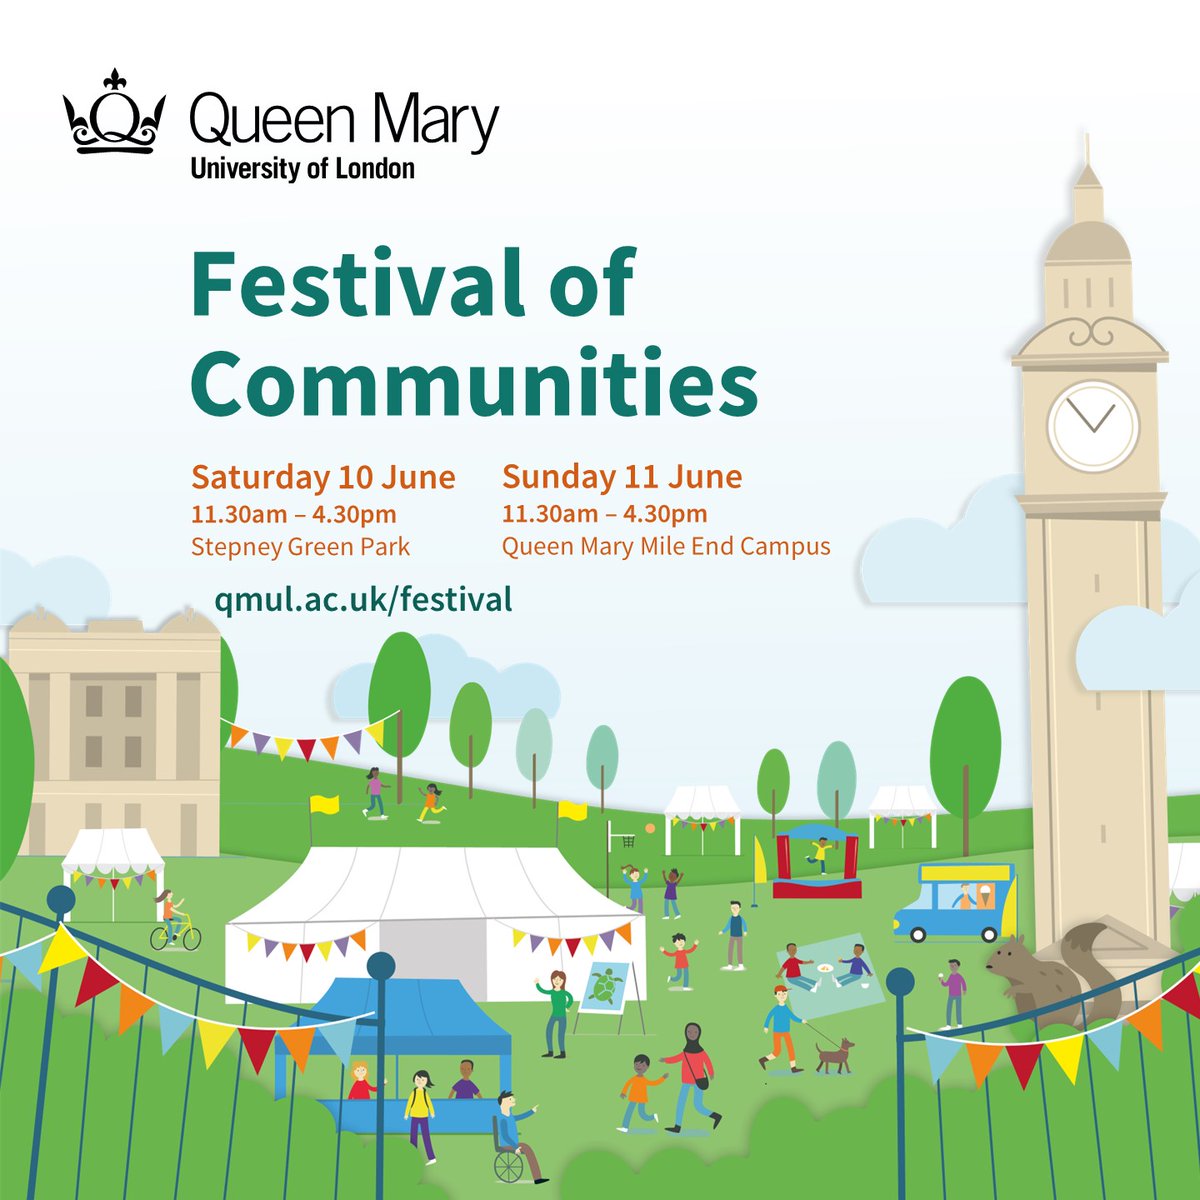 Join the North Thames Agile Team at the Festival of Communities on Saturday 11 June in Stepney Green Park at 11.30-4.30pm for free family activities, workshops and games. It’s going to be bigger than ever! #CommunityResearch #Research #Festival